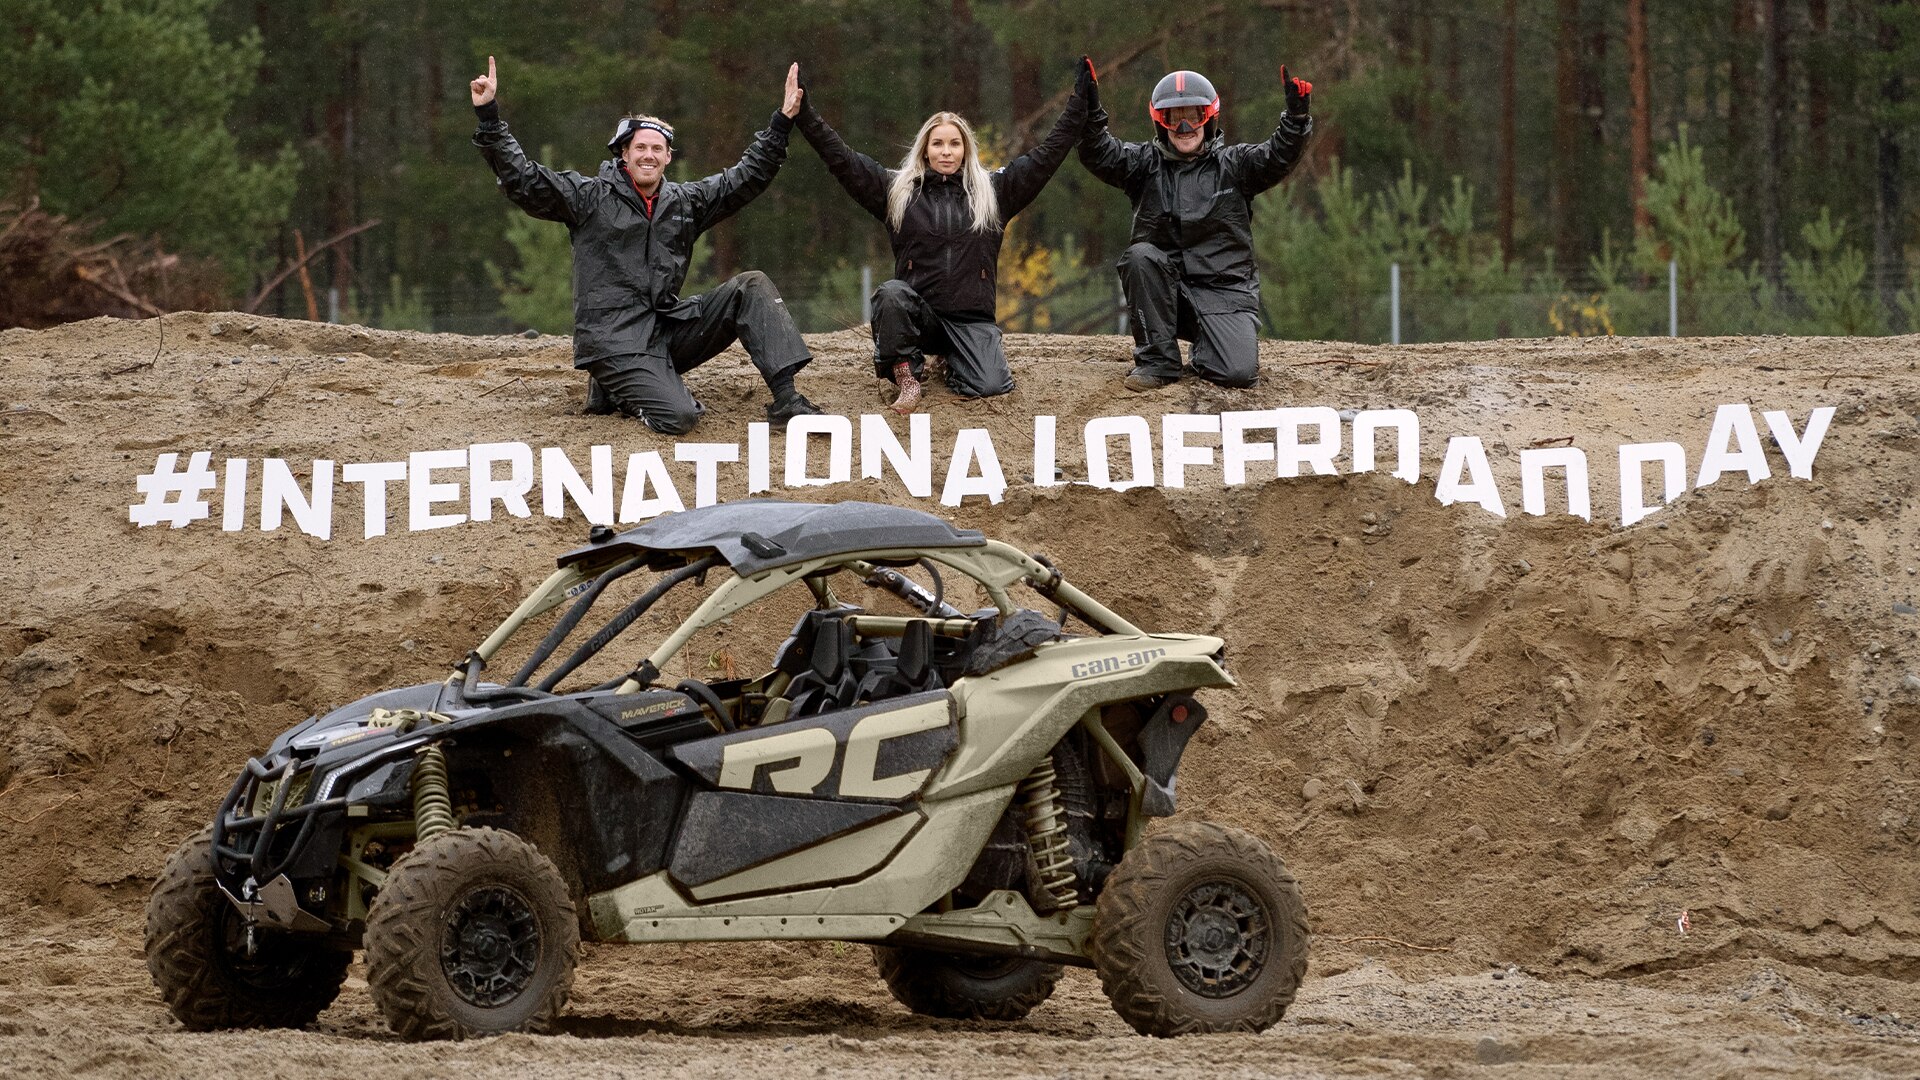 Rider posing for International Off Road Day.